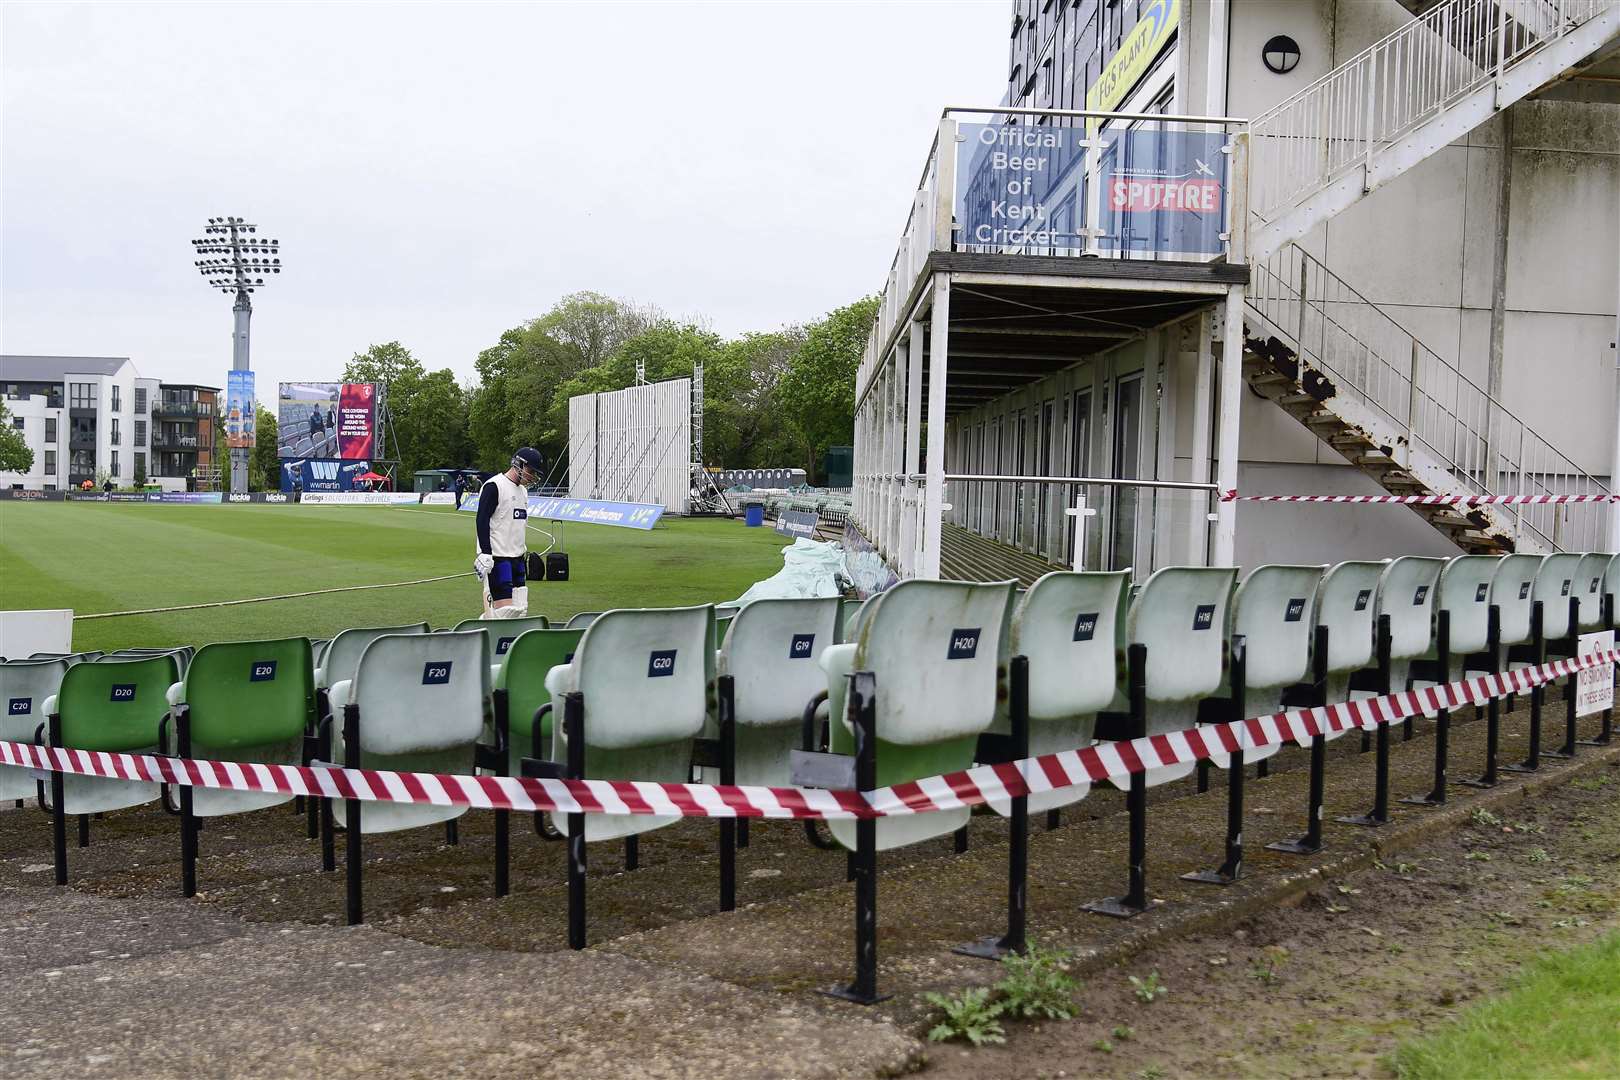 Glamorgan, like all visiting teams to Kent during the pandemic, use the facilities in the Les Ames Stand. Picture: Barry Goodwin (47379880)